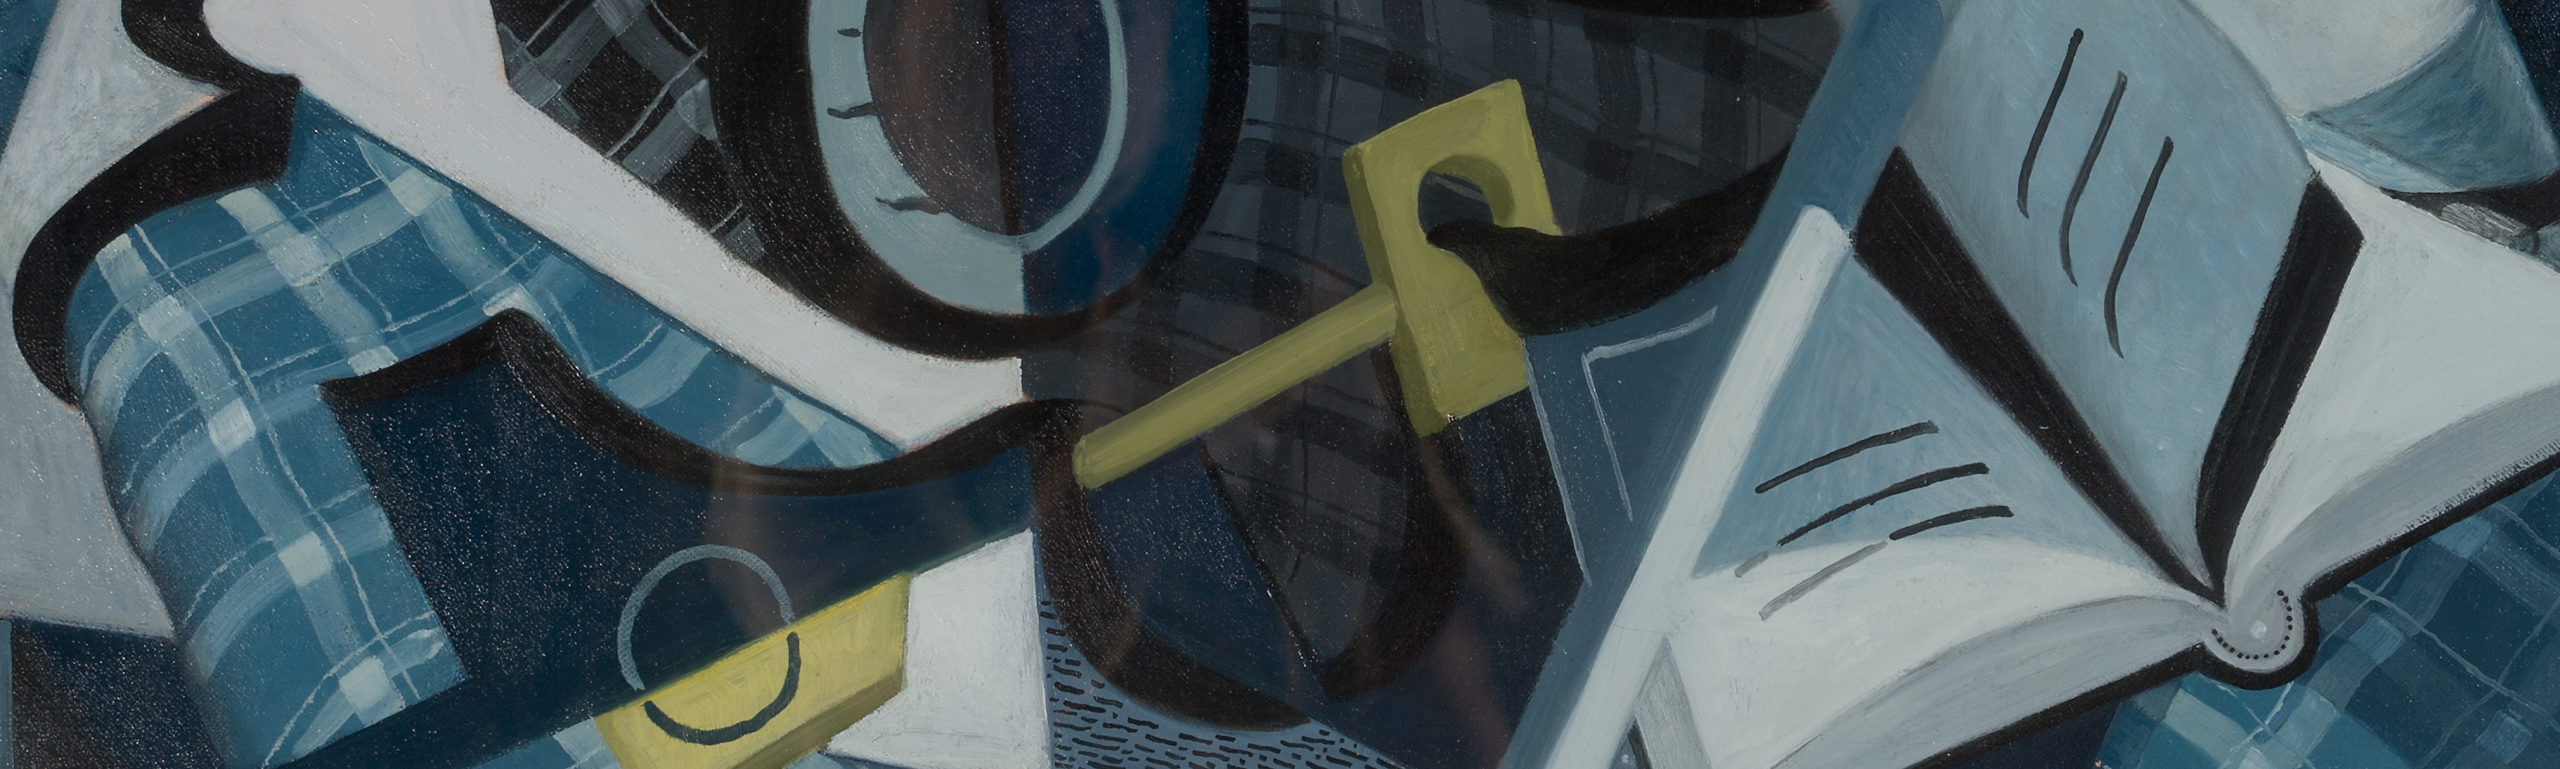 A excerpt from a painting in a cubist style, which shows a key and a book